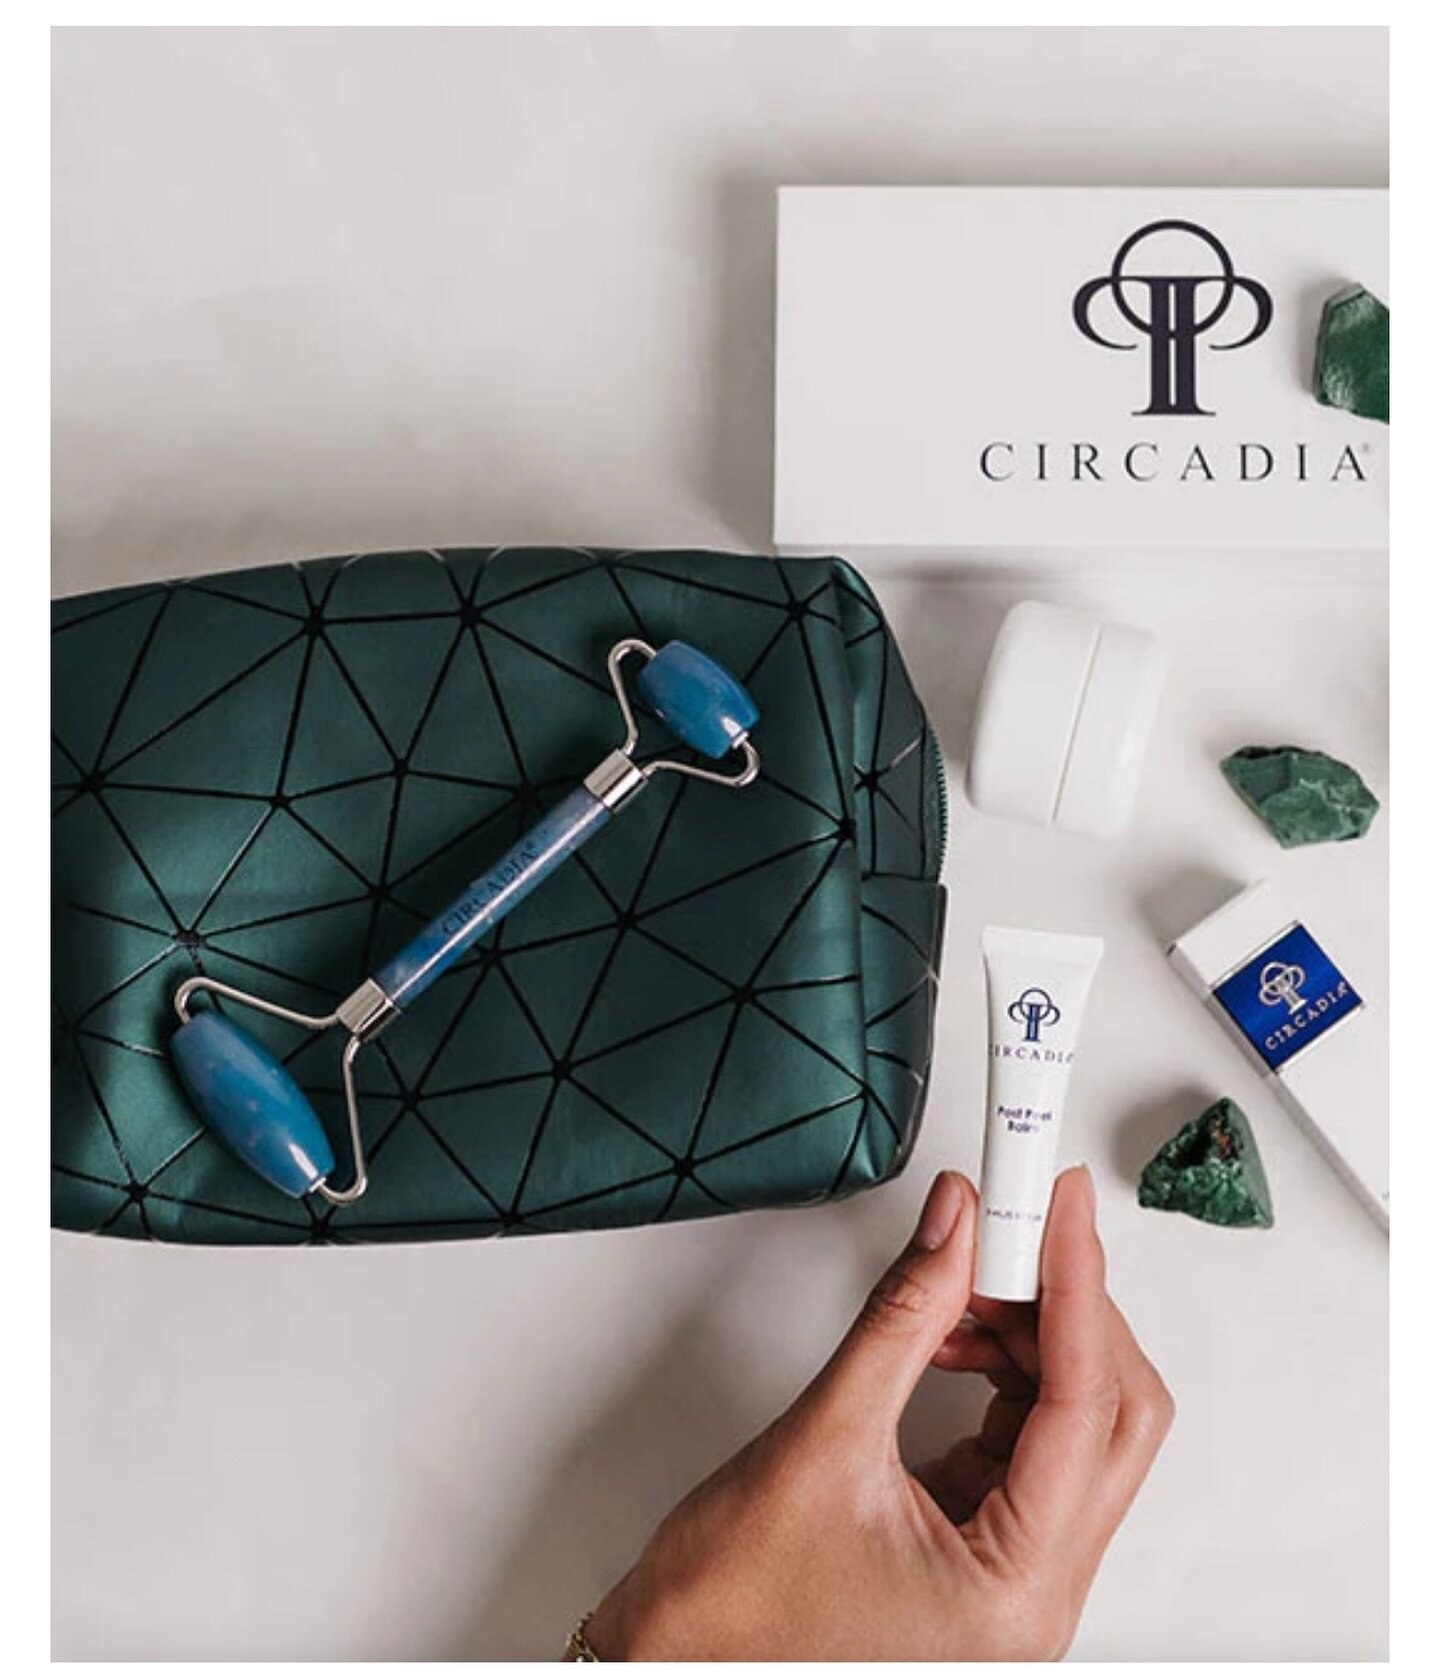 Elevate your skincare routine with Circadia&rsquo;s exquisite Gemstone Radiance Kit, a luxurious collection curated to enhance your client&rsquo;s natural beauty 🌿

#skincarekit #circadia #theluxemedspa #levelupyourskincare